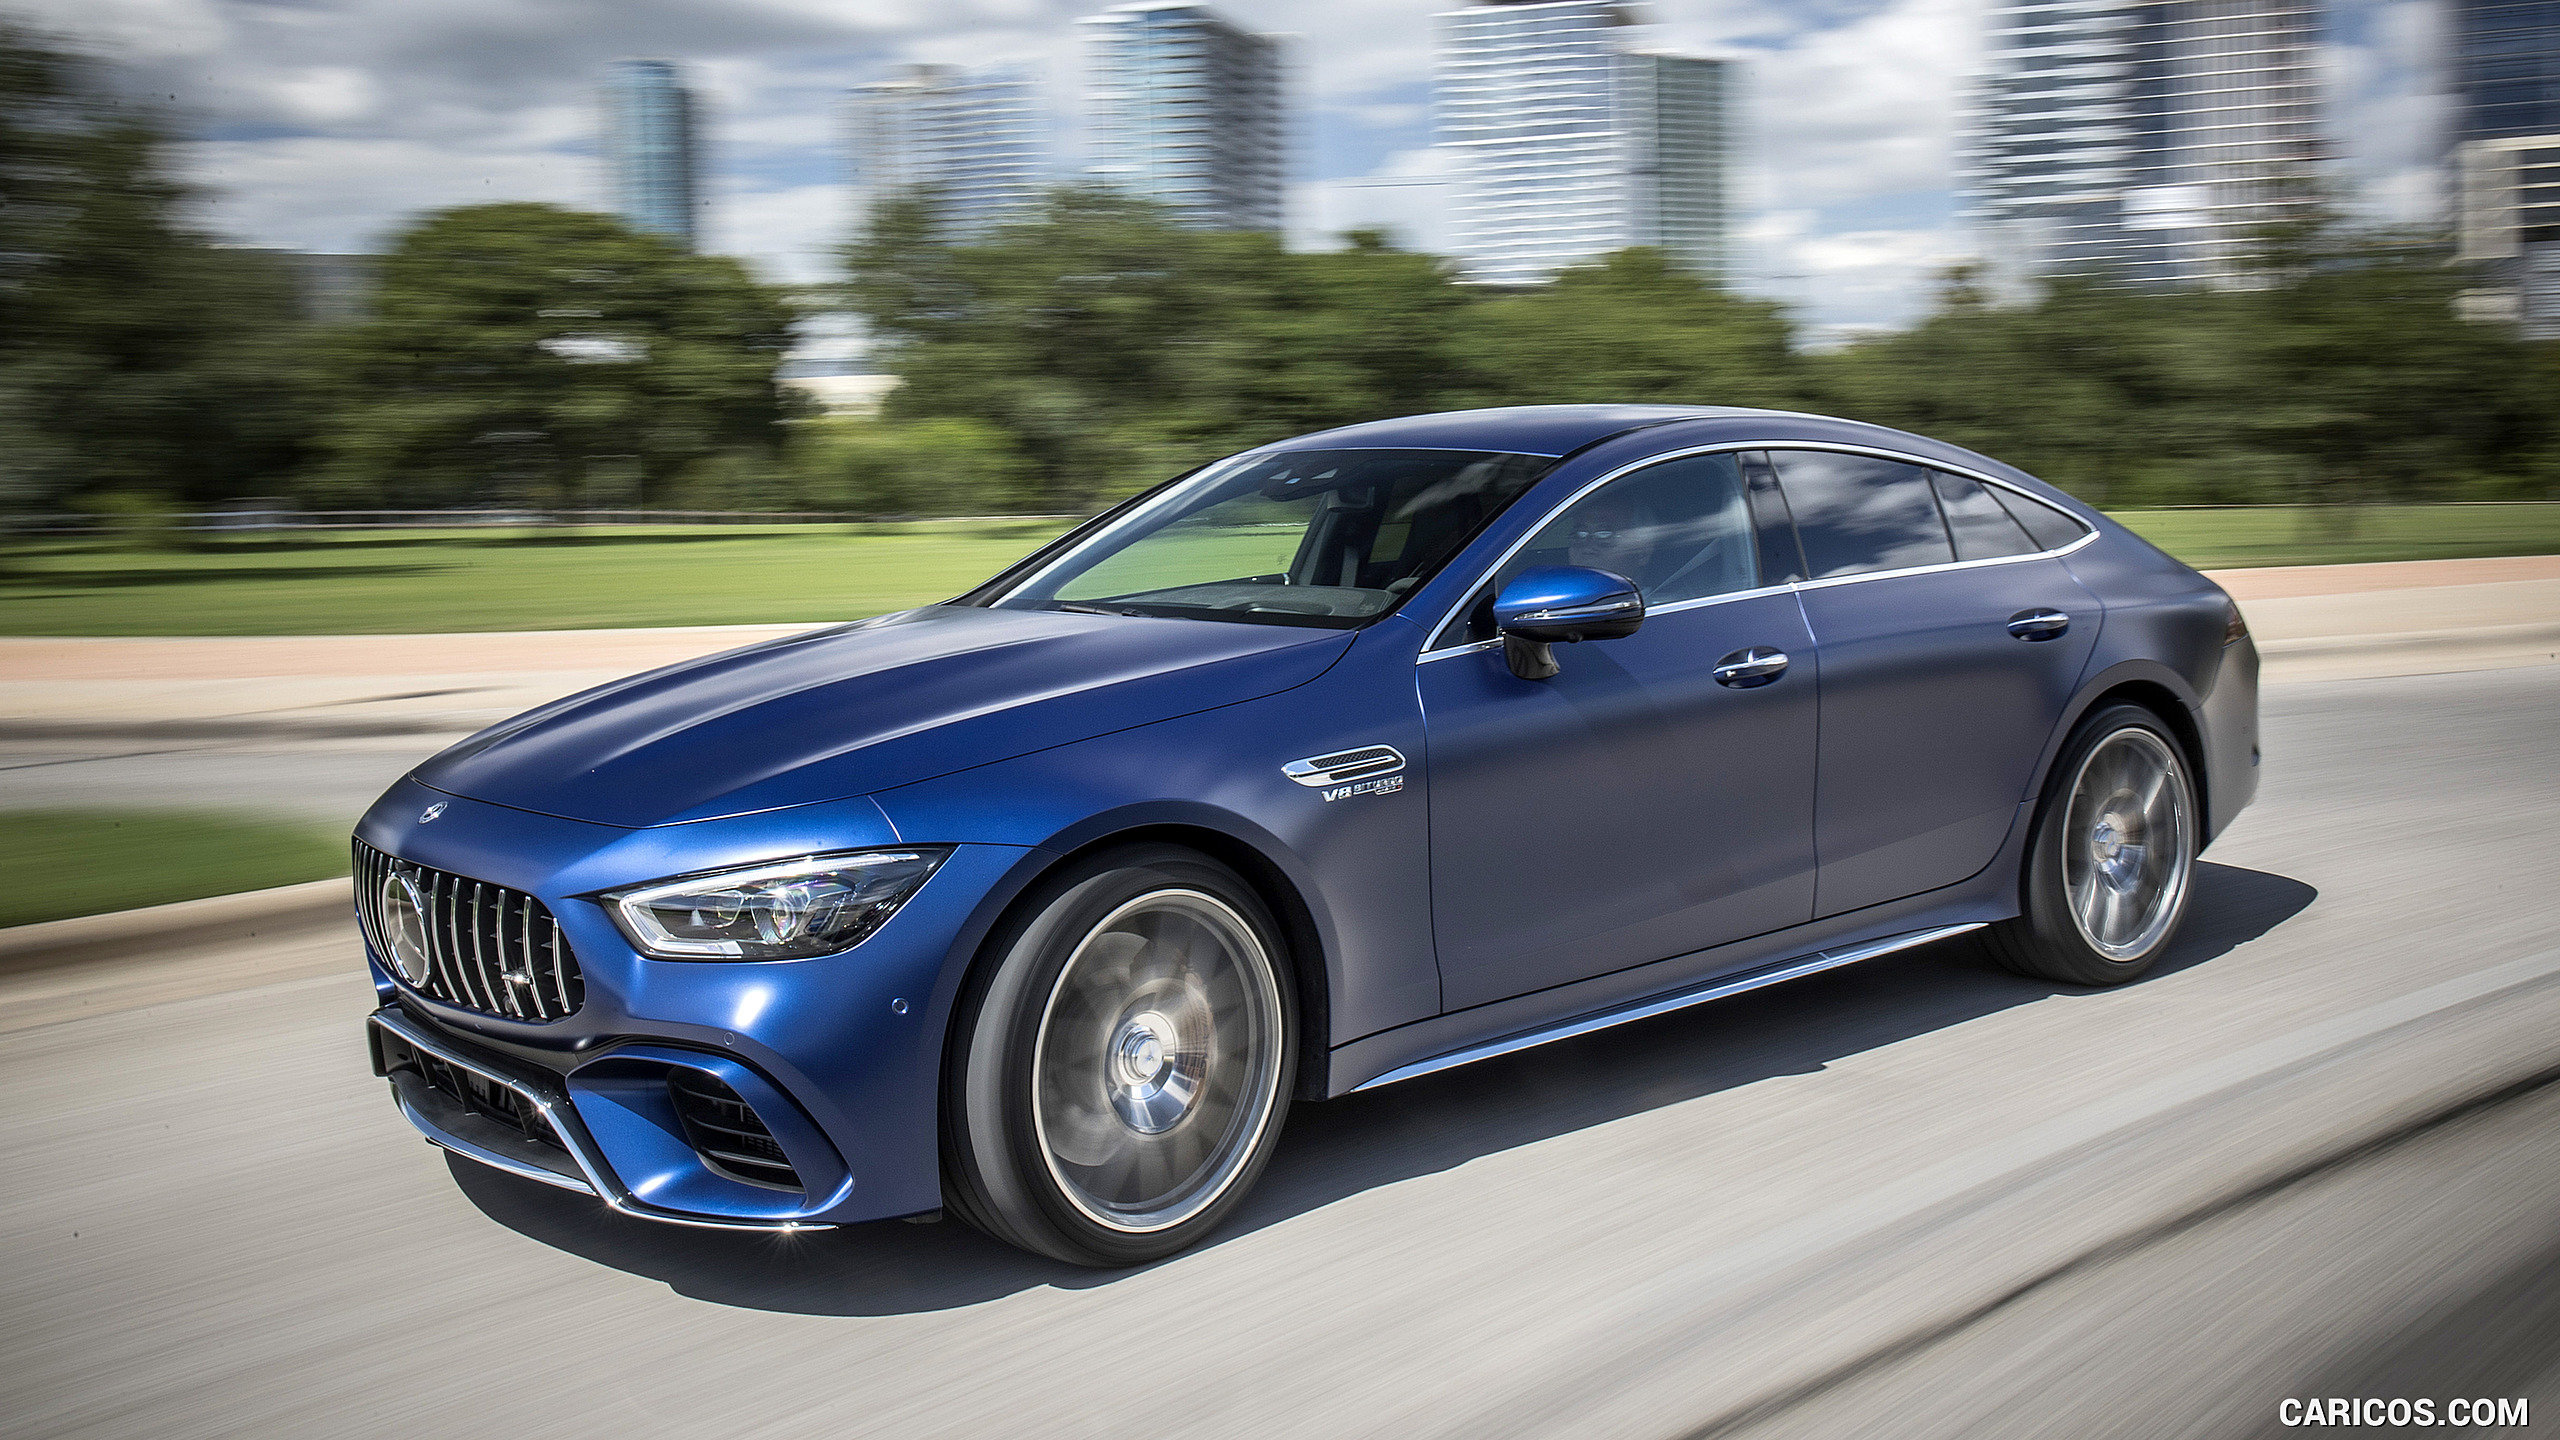 2019 Mercedes-AMG GT 63 S 4MATIC+ 4-Door Coupe - Front Three-Quarter, #114 of 427